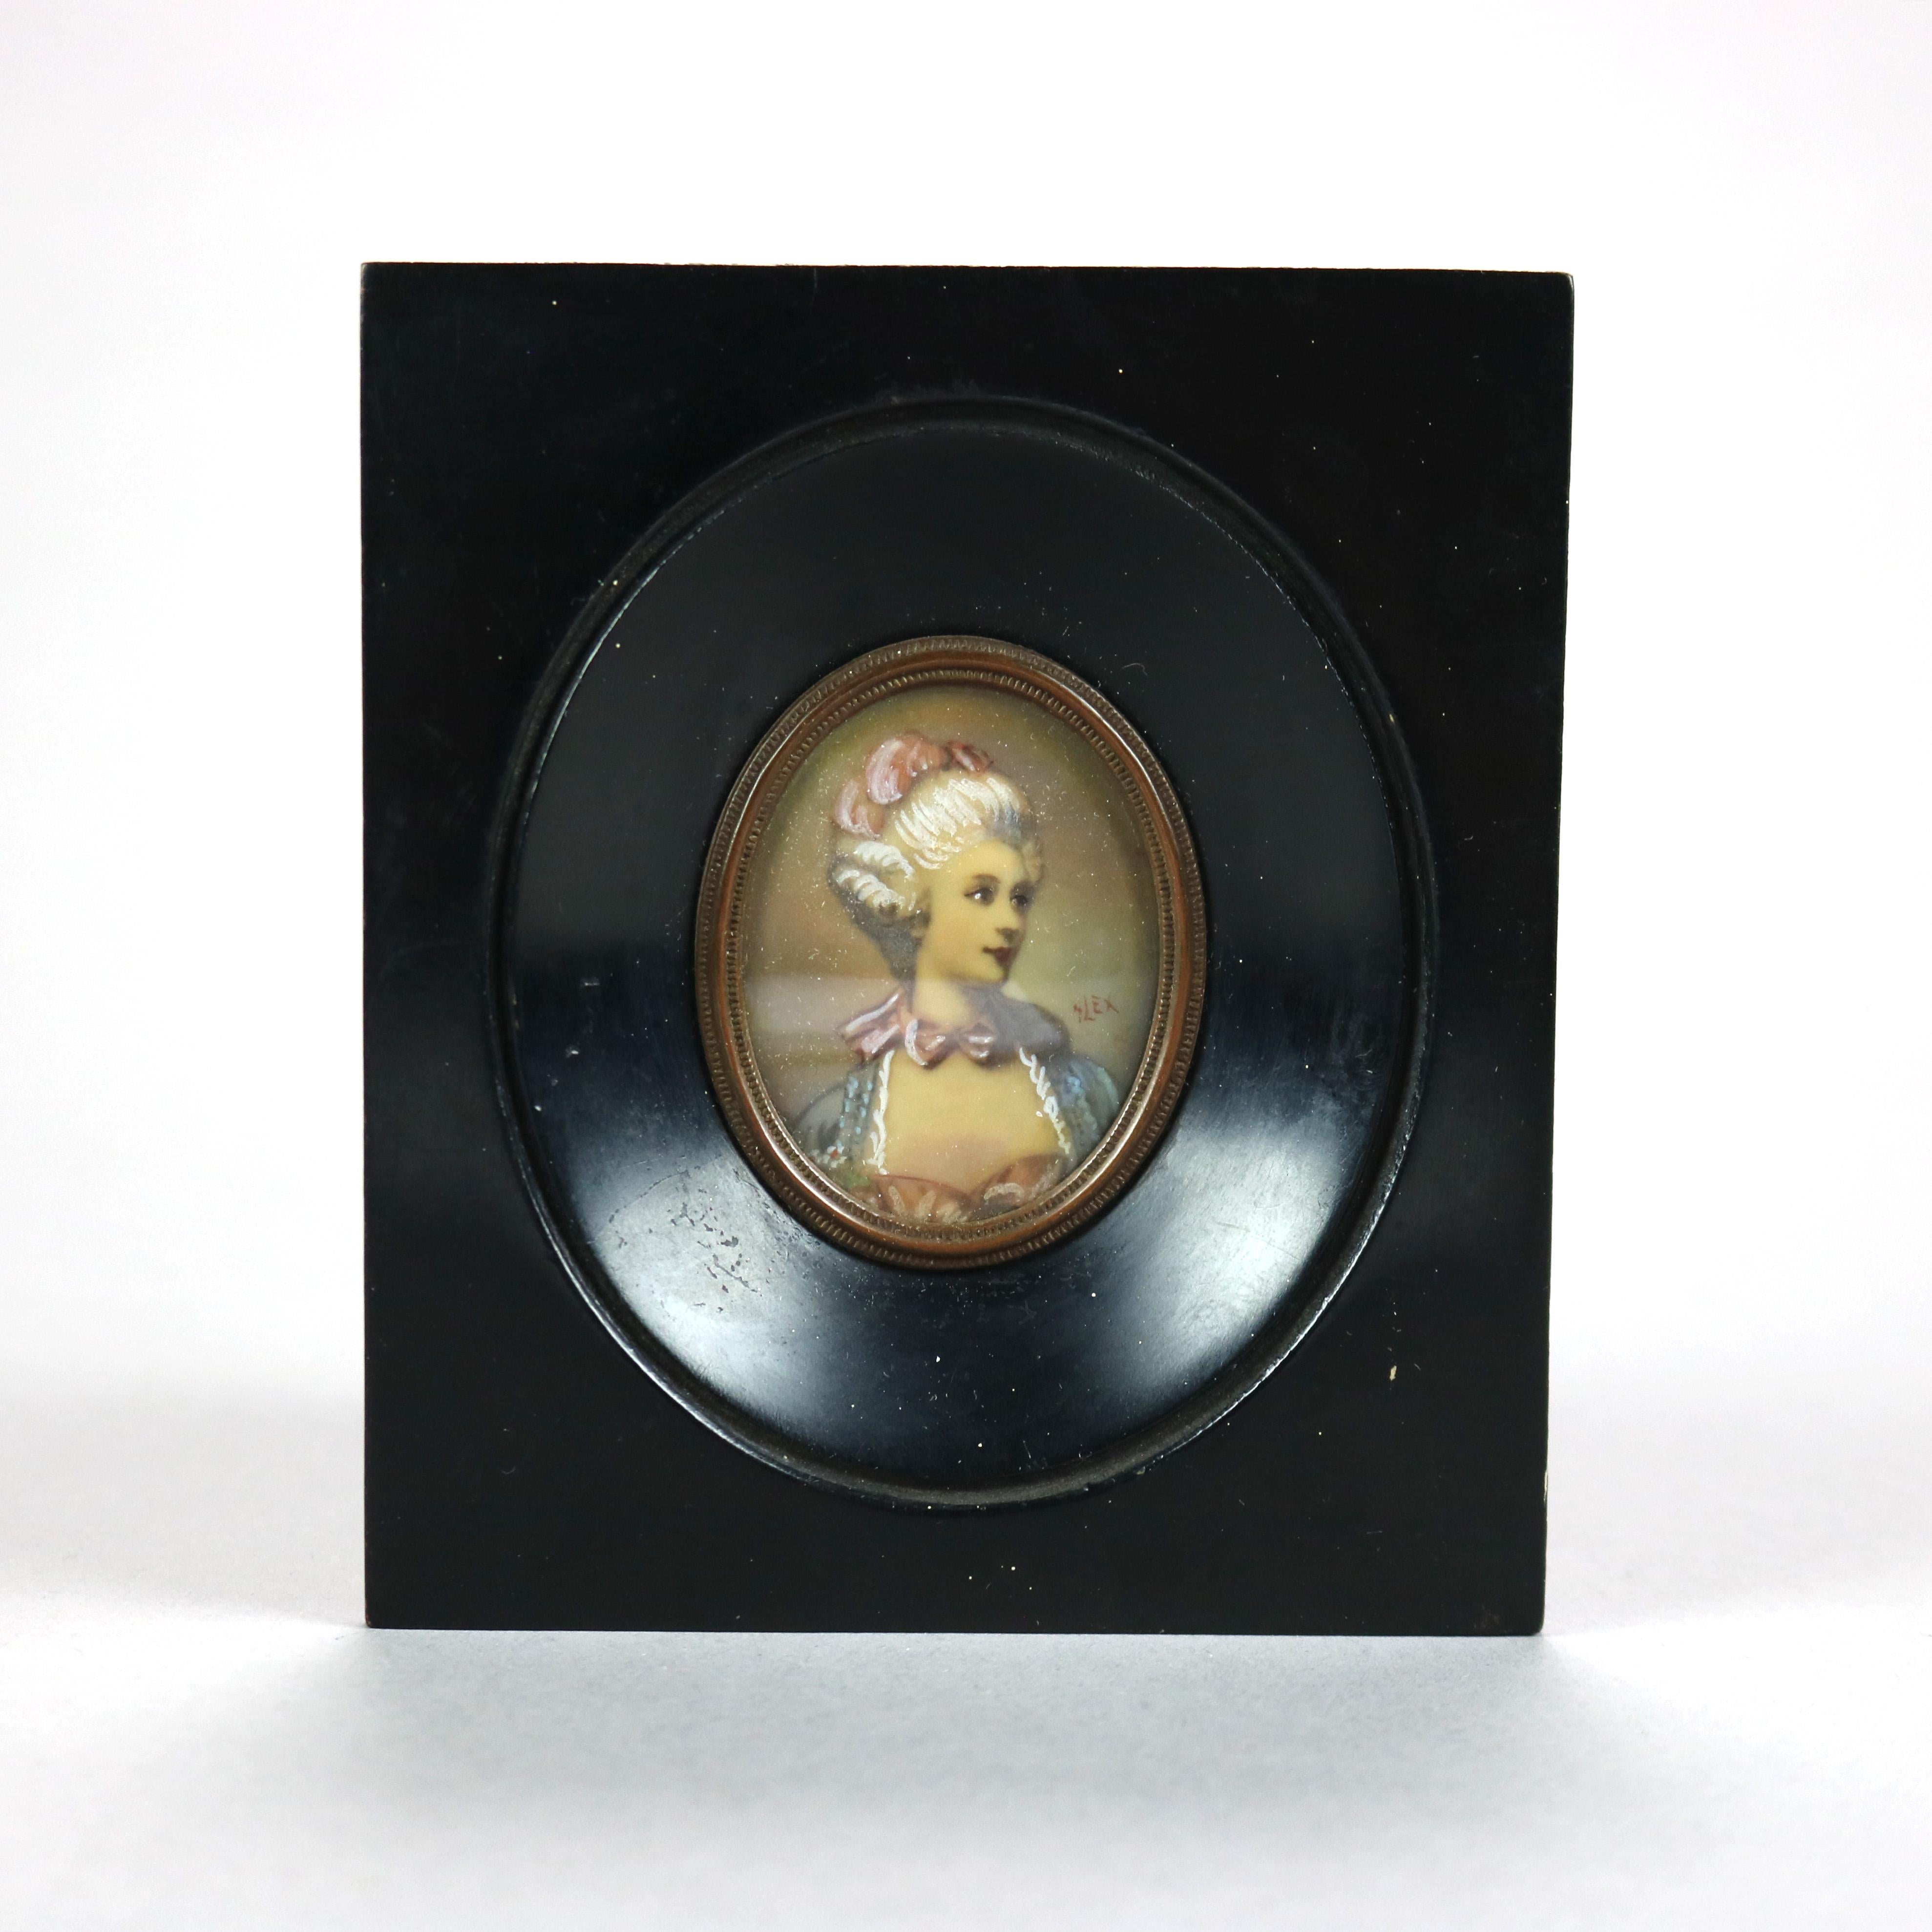 An antique miniature portrait painting on celluloid of Marie Antoinette seated in parcel gilt frame, artist signed Alex lower right, late 19th century

Measures - 4.75'' H x 4.25'' W x .75'' D.

Catalogue Note: Ask about DISCOUNTED DELIVERY RATES